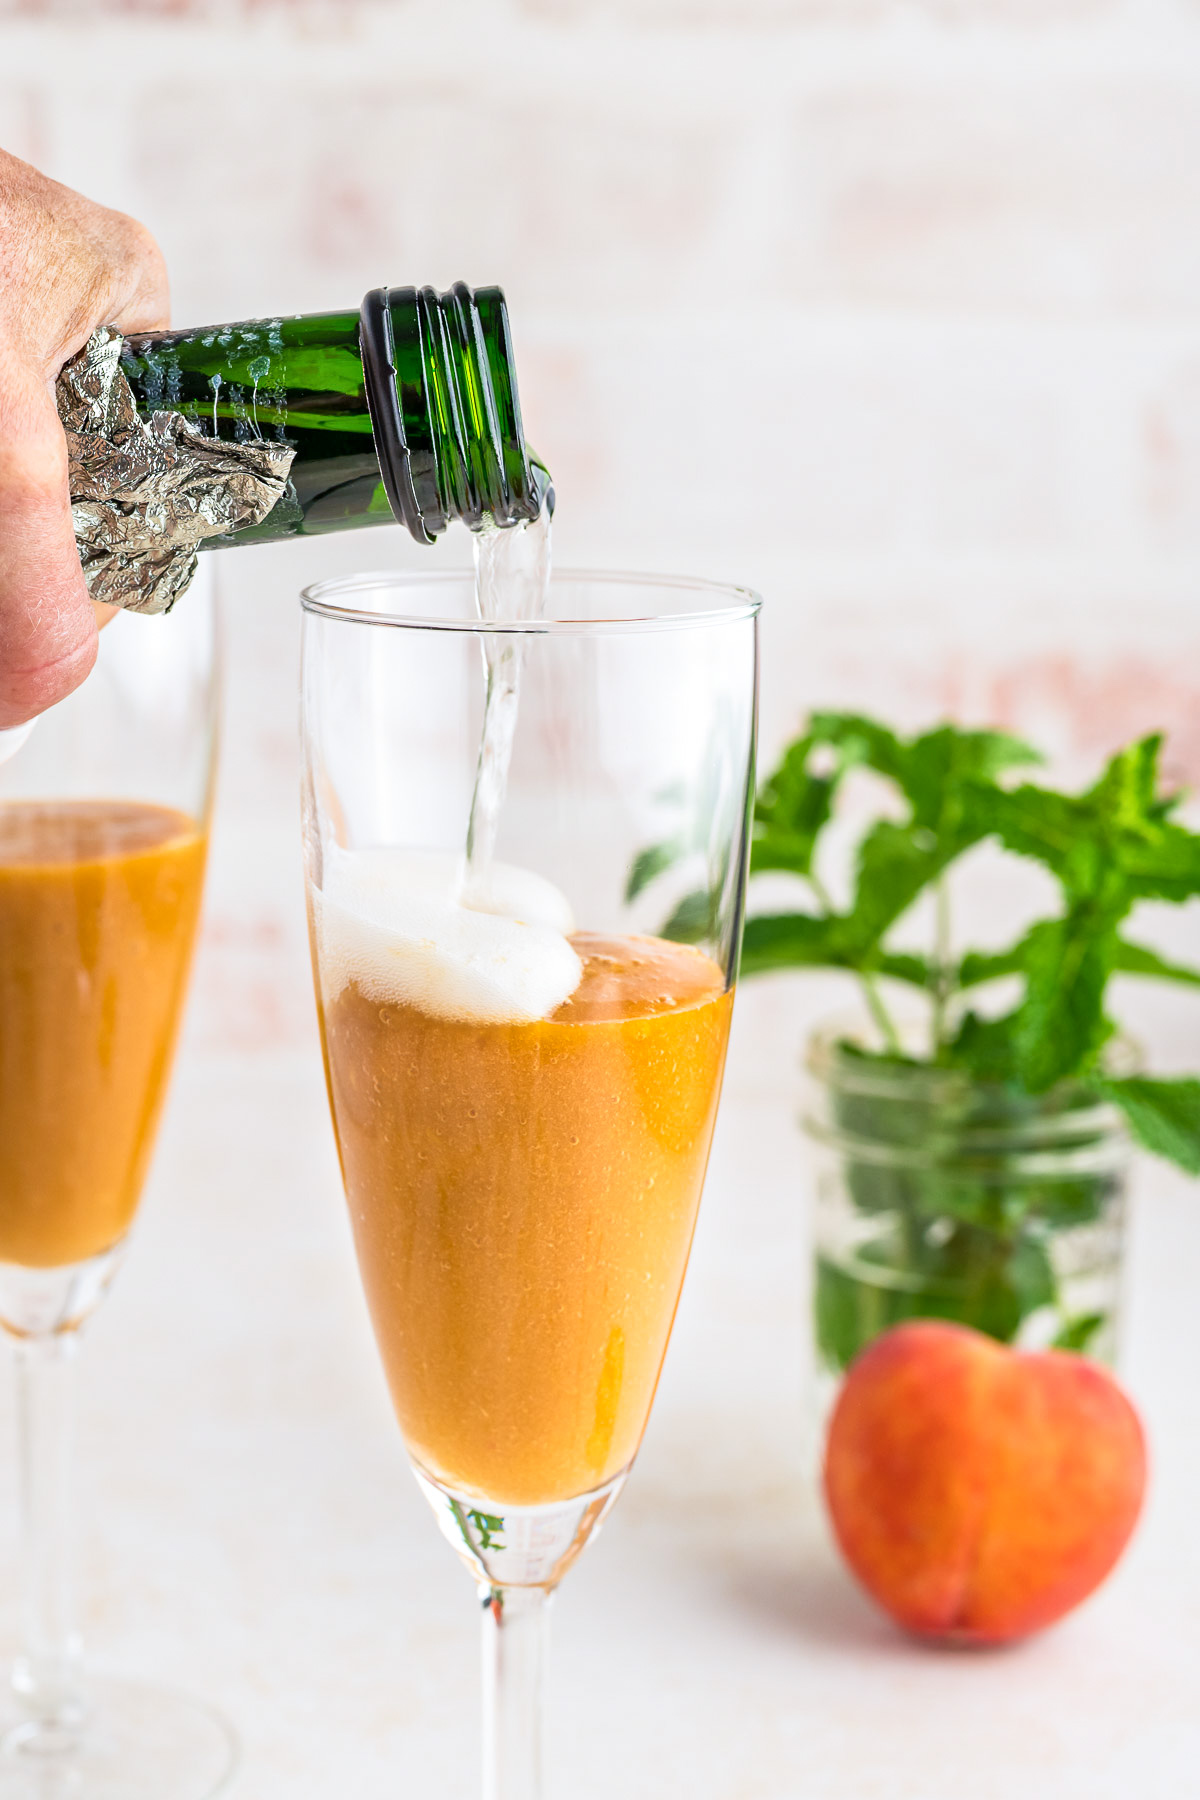 A hand pours prosecco into a champagne glass filled with peach puree.